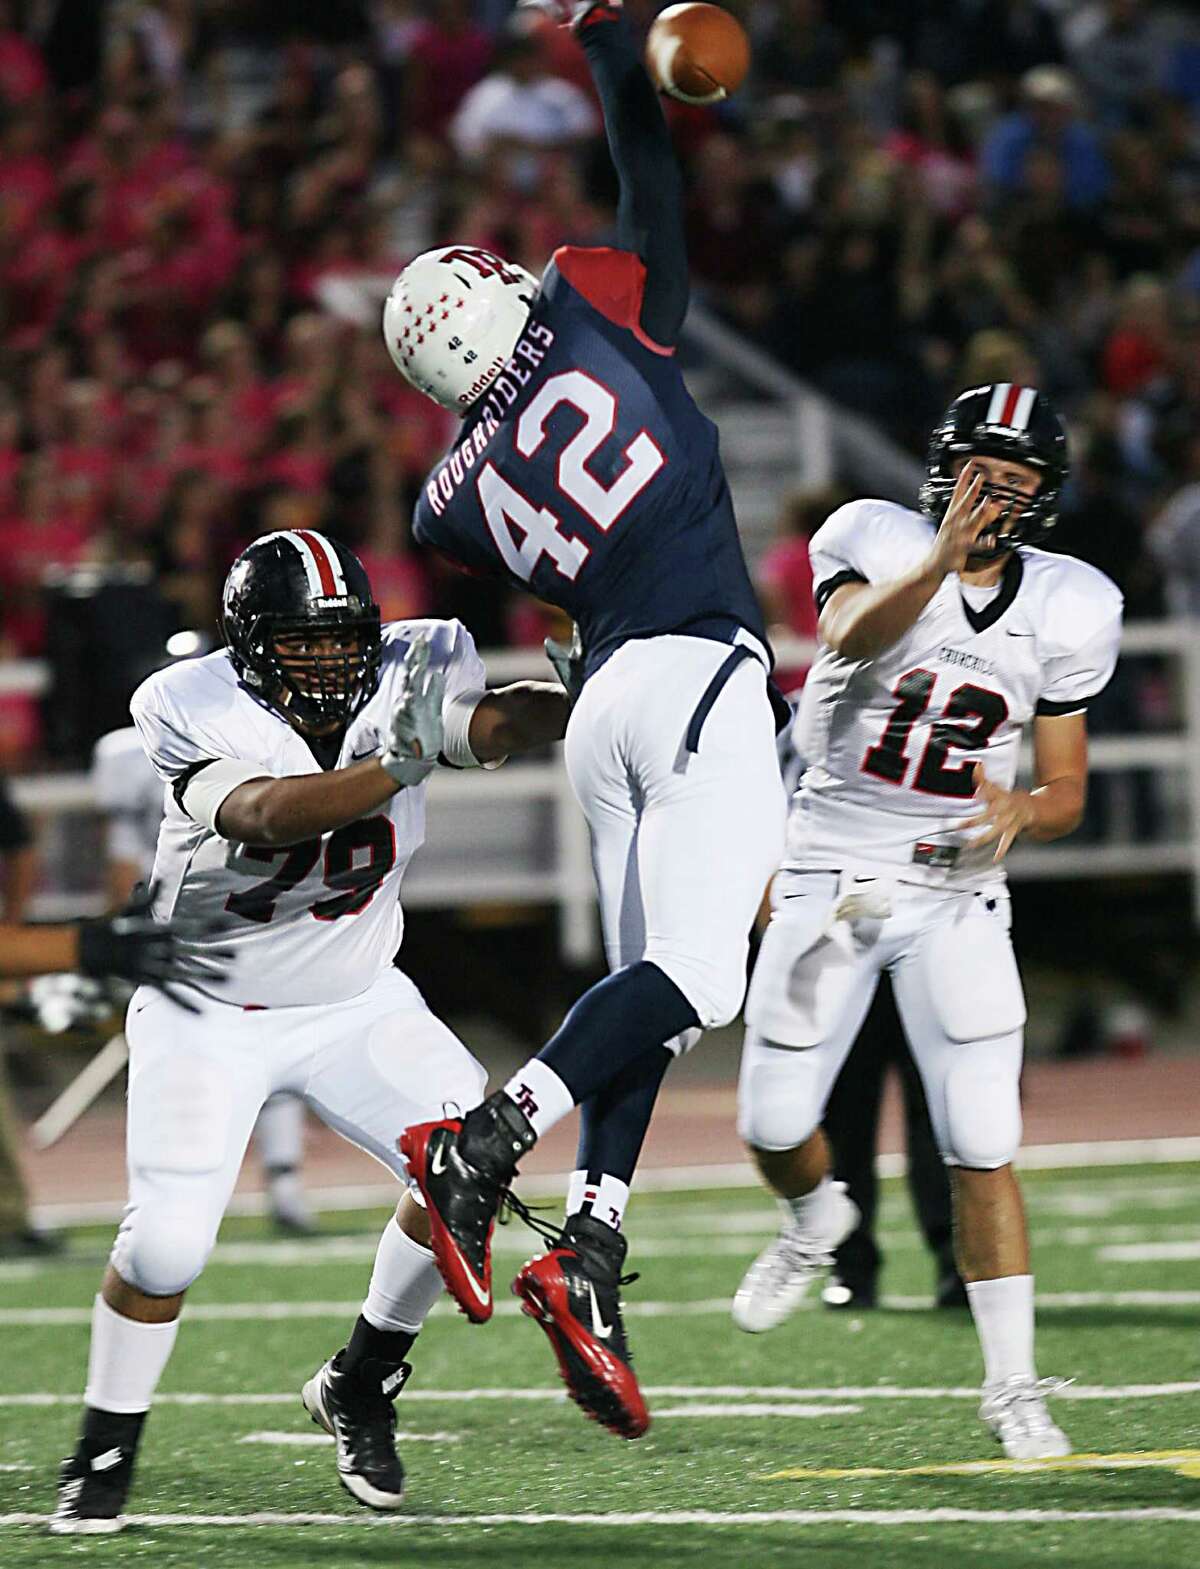 Roosevelt High Schoo's John Taylor tries to block a pass from Churchill's quarterback Nate Pearson as Churchill's Julian Casas pushes him from doing so Saturday, Oct. 26, 2013 at Comalander Stadium.